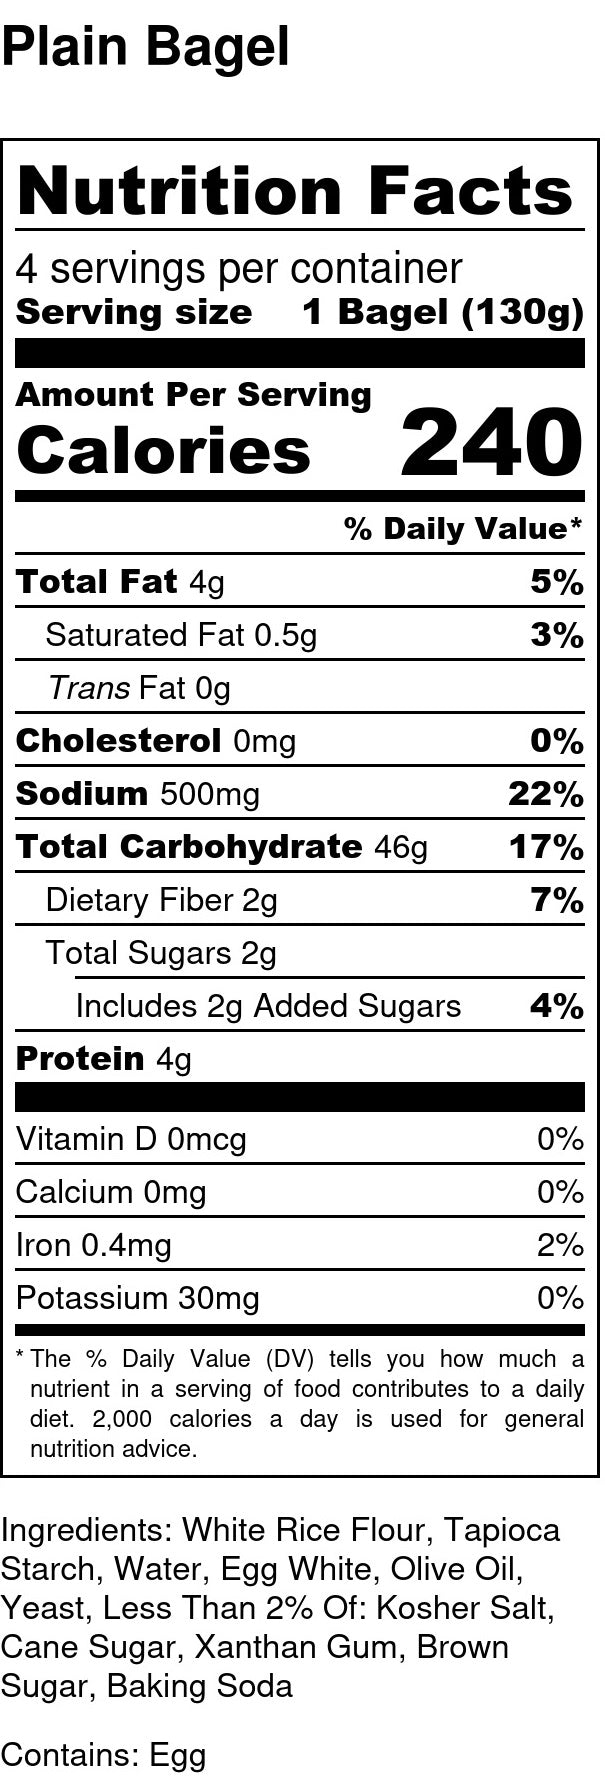 nutrition facts for gluten free and dairy free plain bagels contains eggs